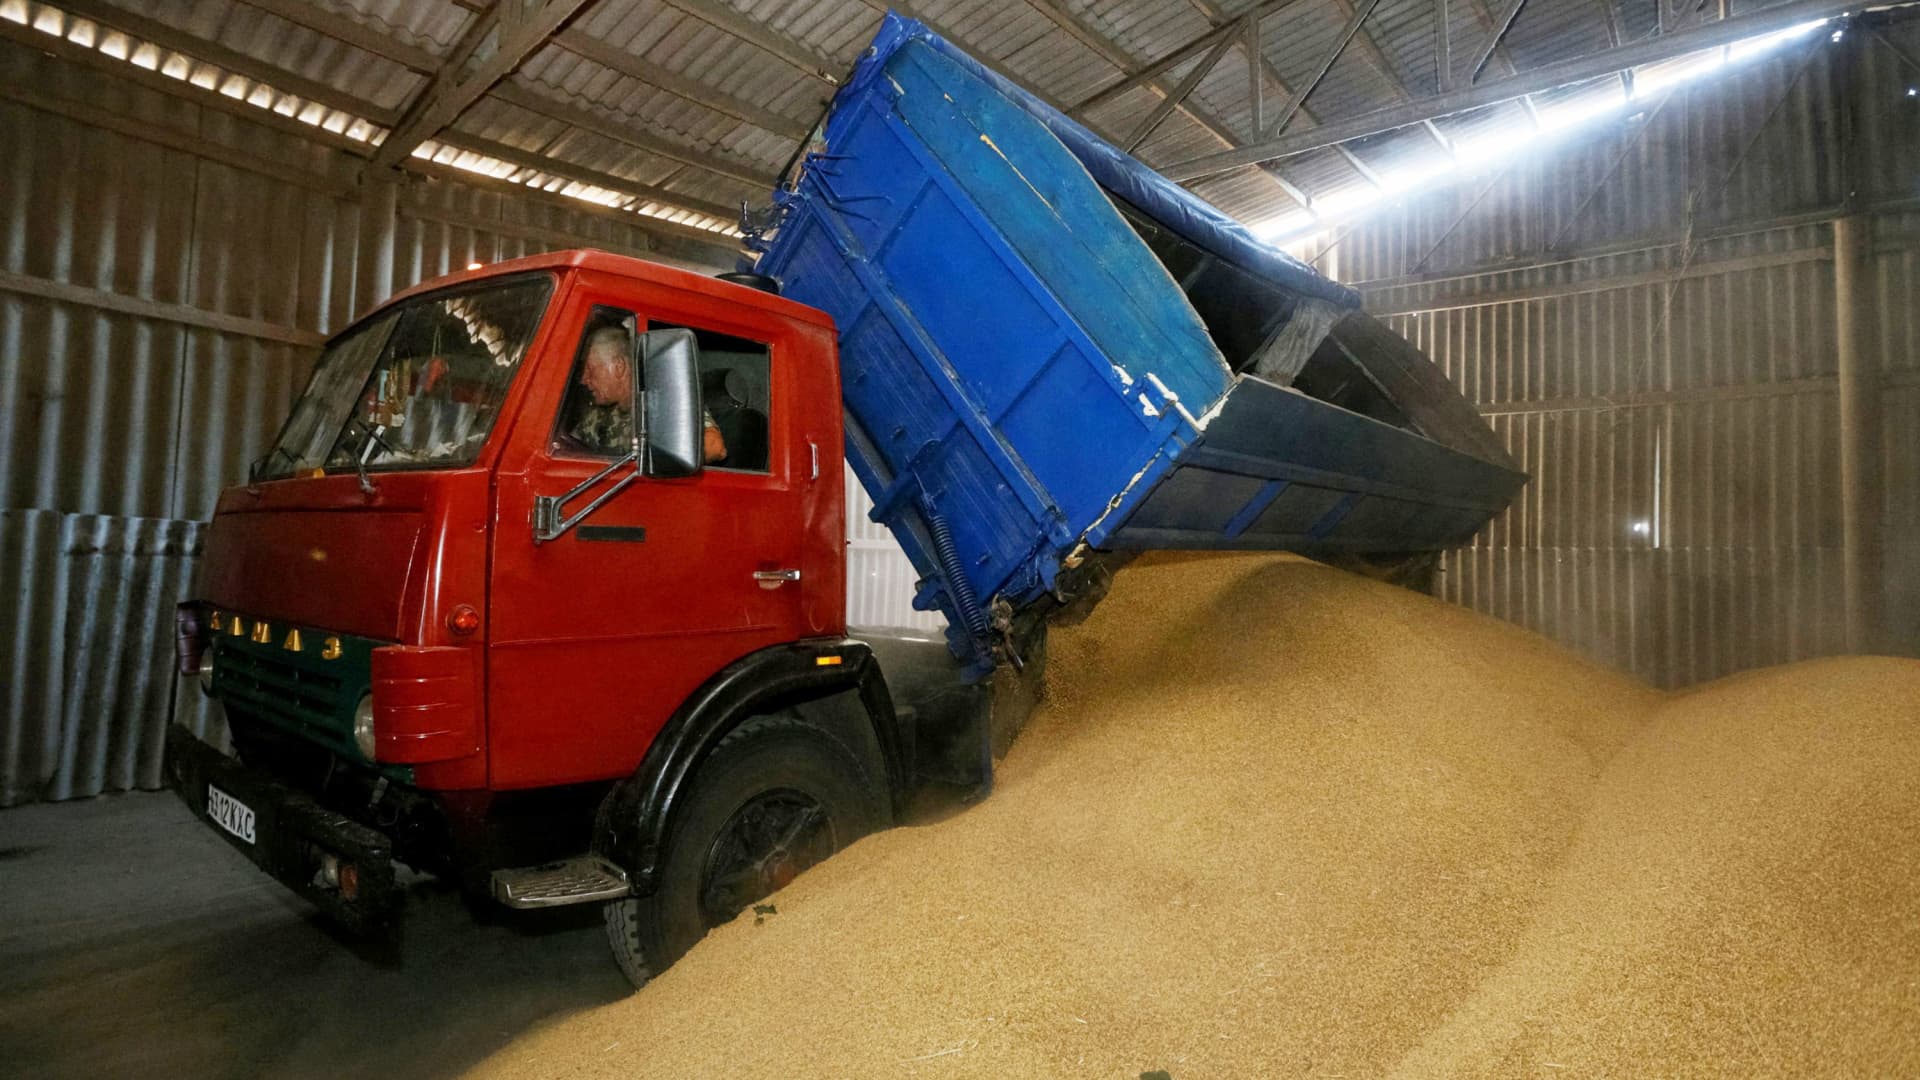 A driver unloads a truck at a grain store during barley harvesting in the village of Zhovtneve, Ukraine, July 14, 2016.